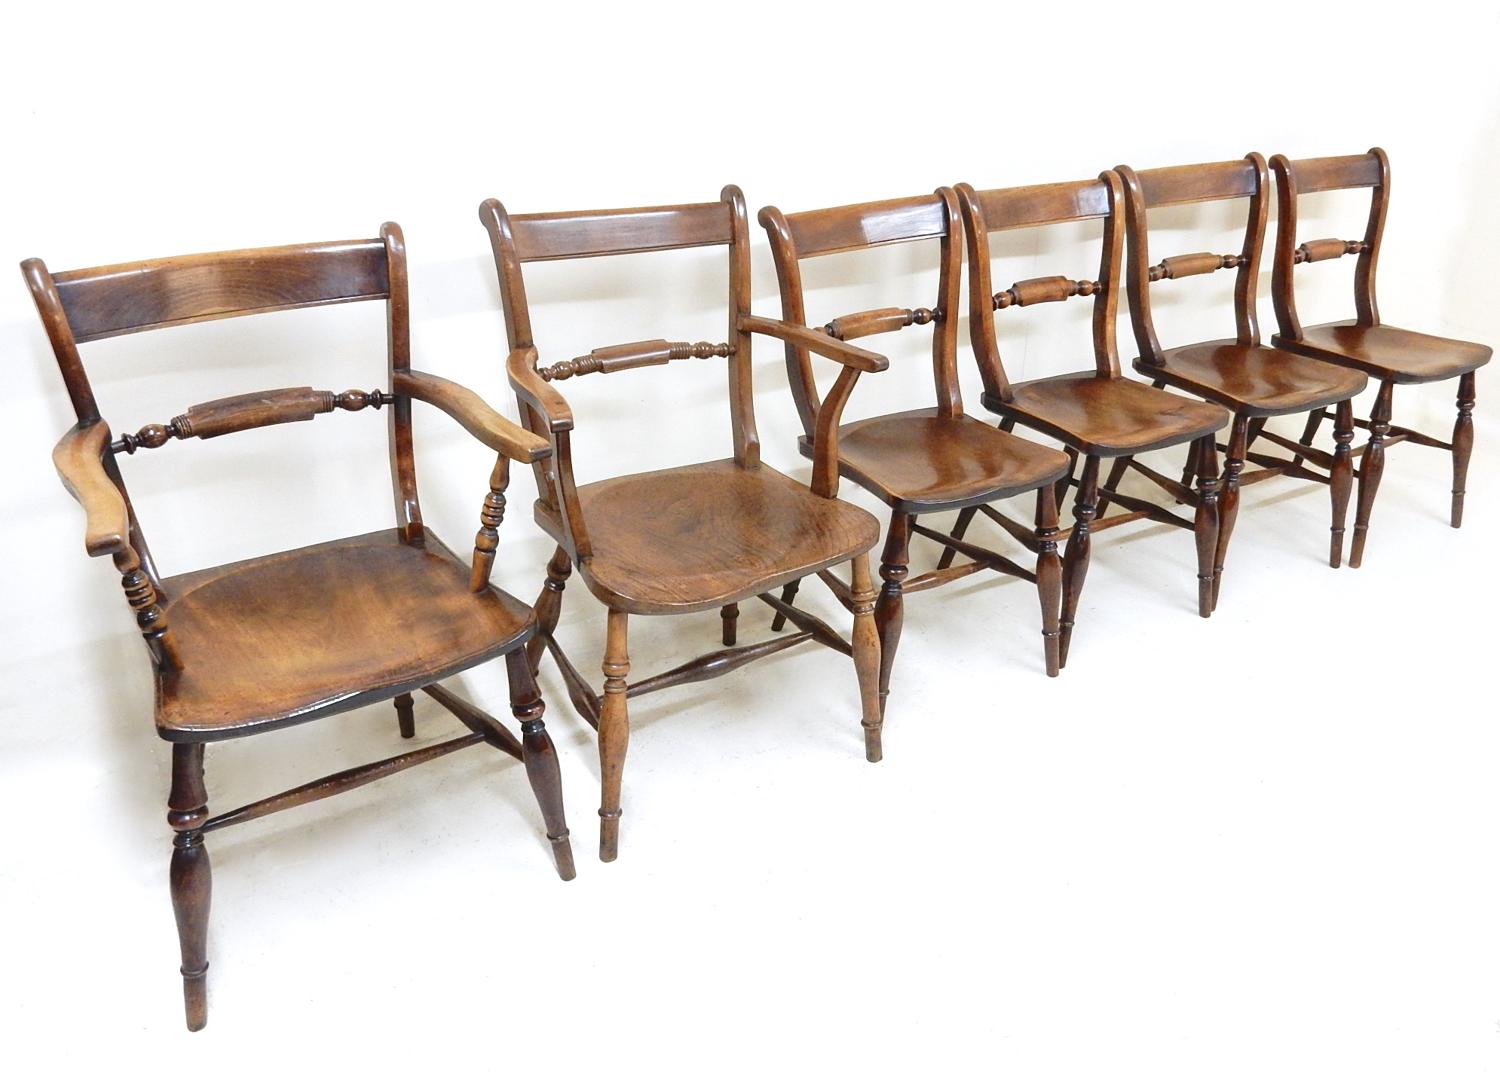 Antique Windsor Dining Chairs